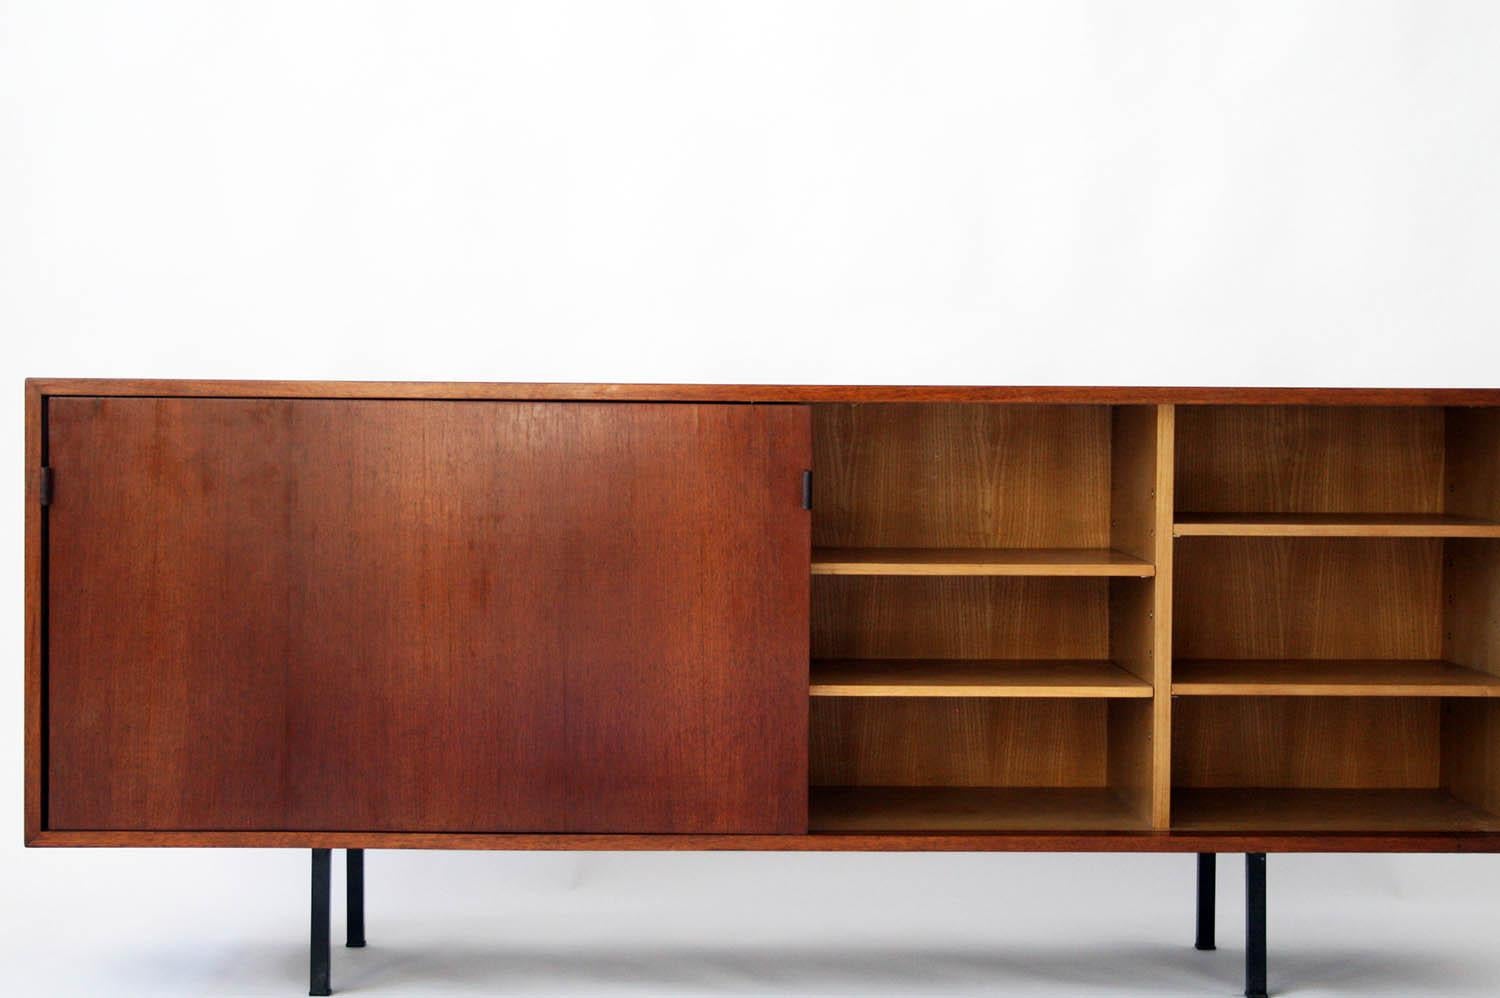 Steel Early Walnut Credenza by Florence Knoll for Knoll